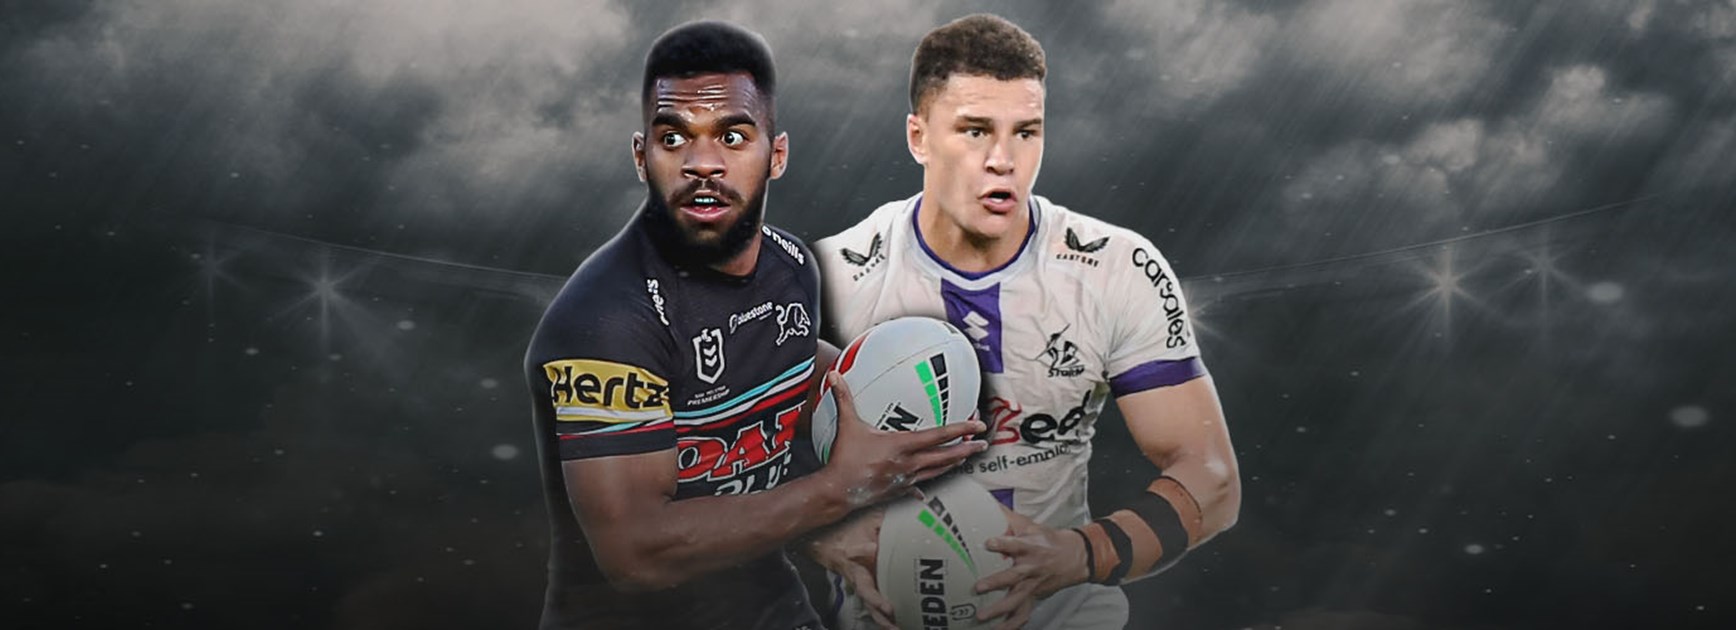 Panthers v Storm: Injured stars confirmed to play; Garlick called in